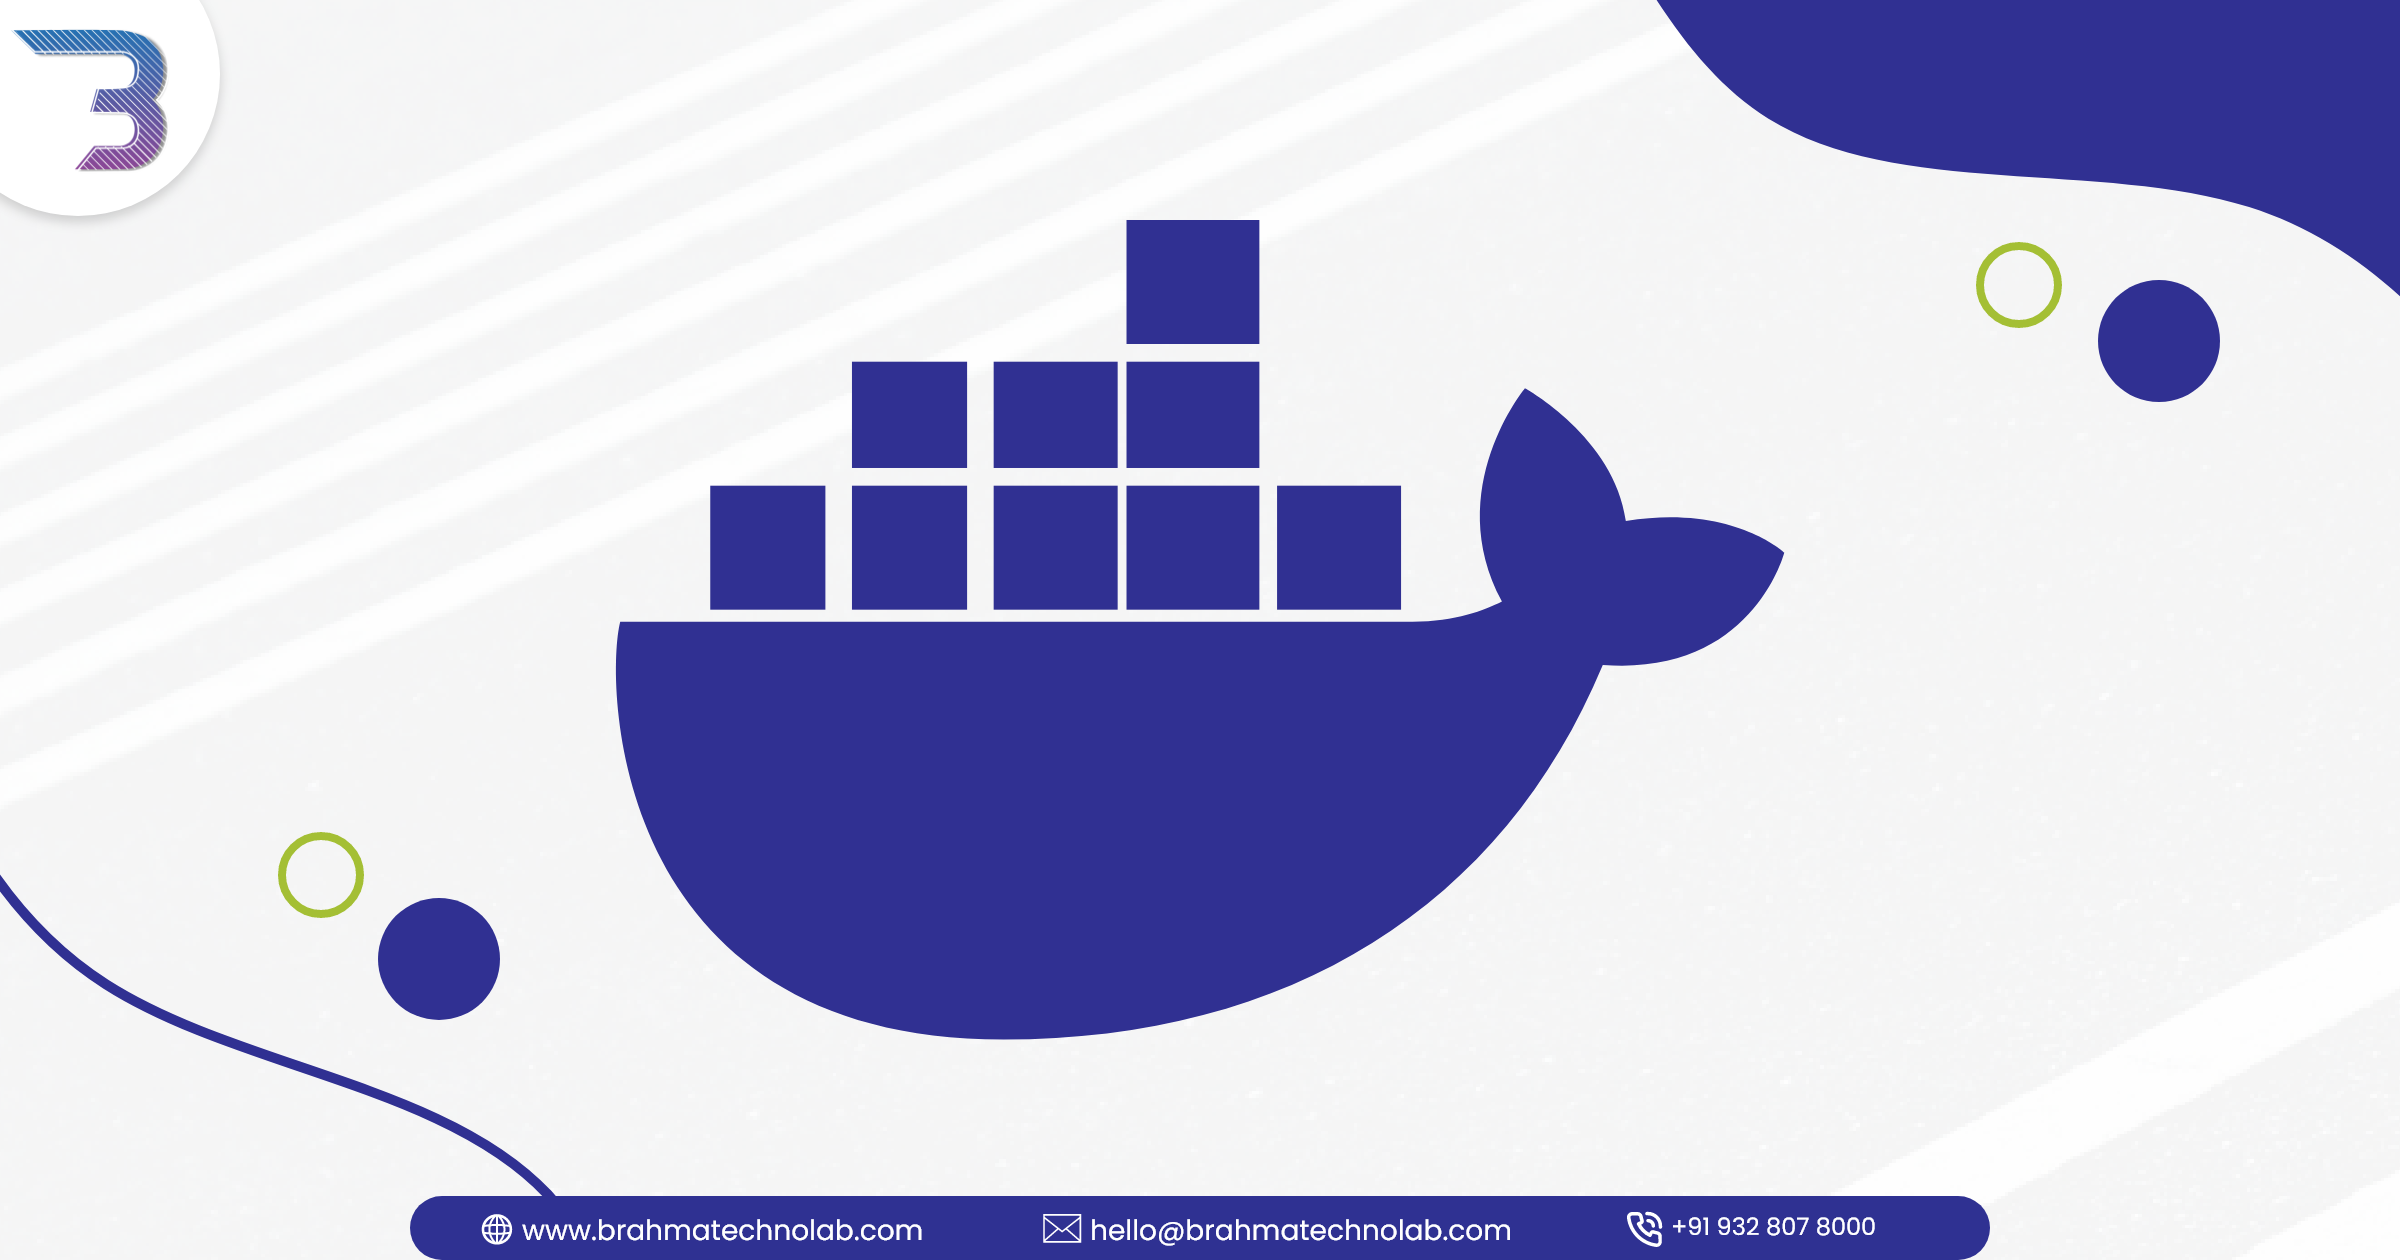 Boost Your Development with Docker!